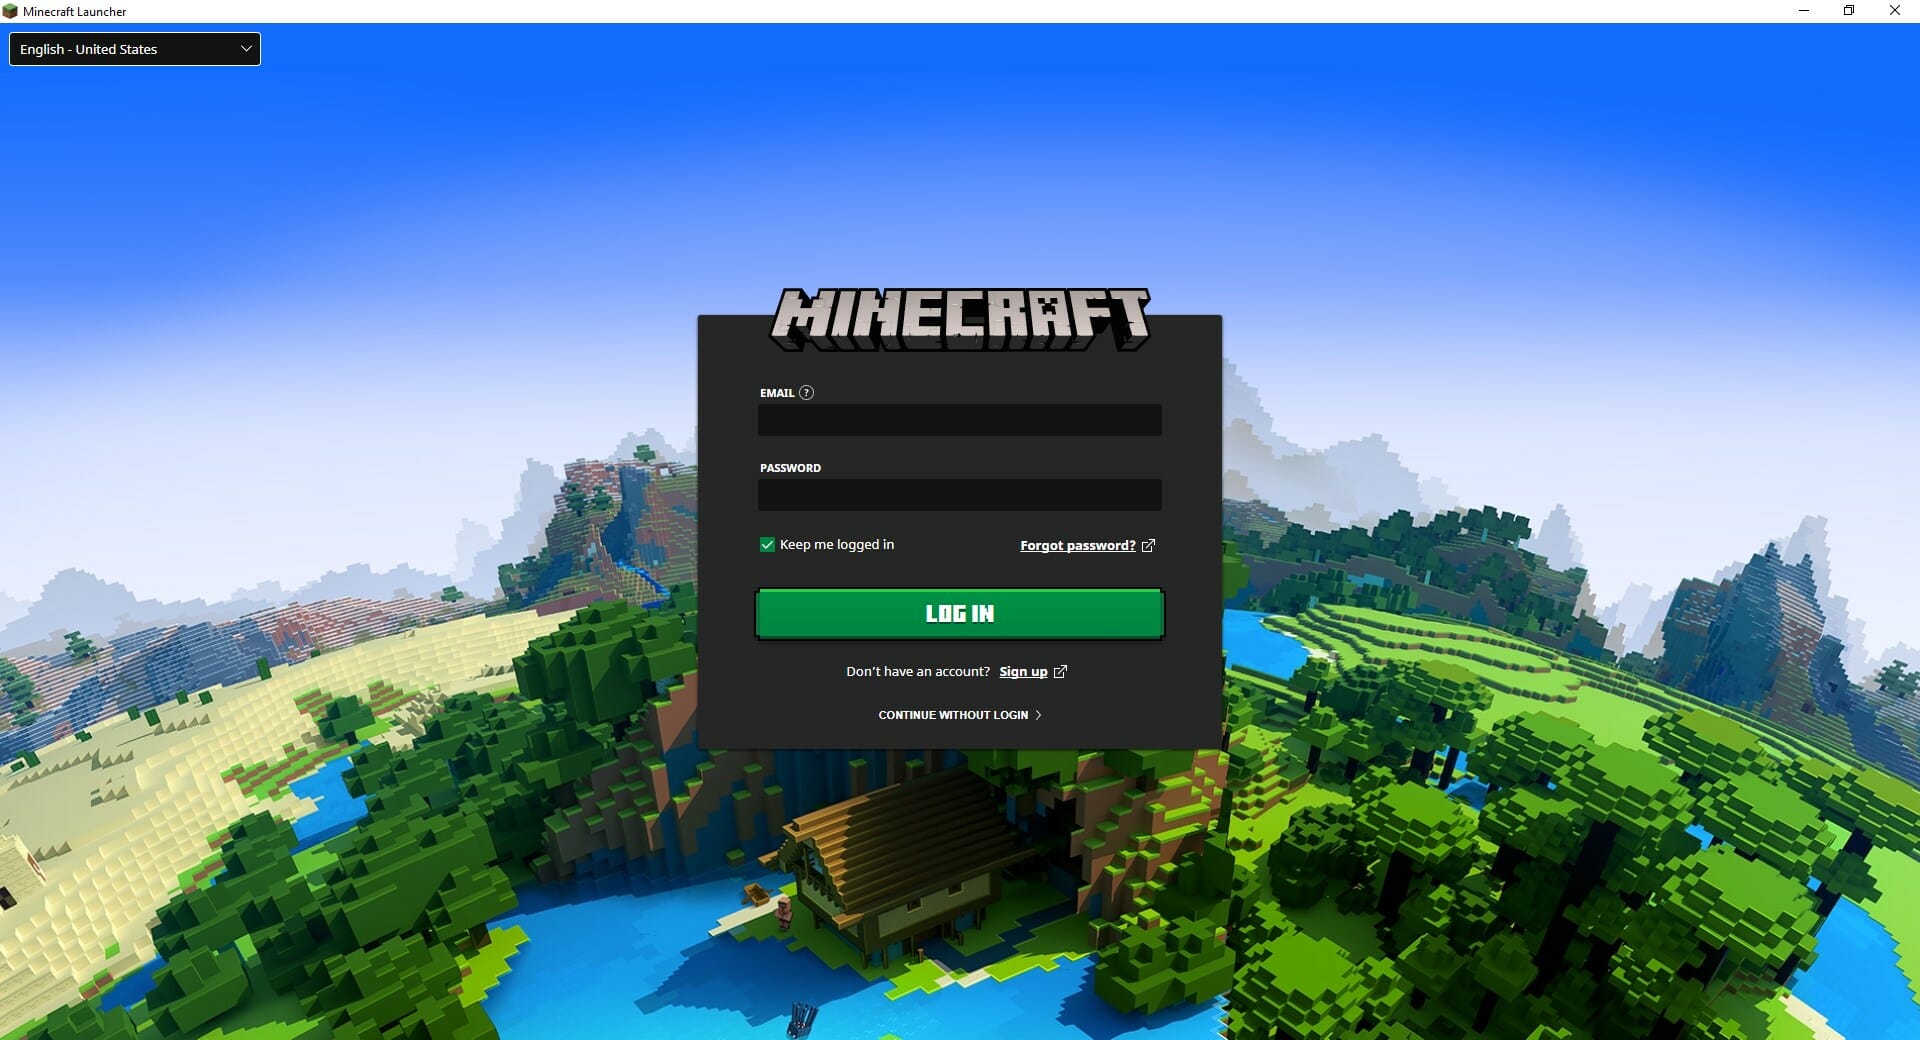 How to connect Mojang account to Microsoft account